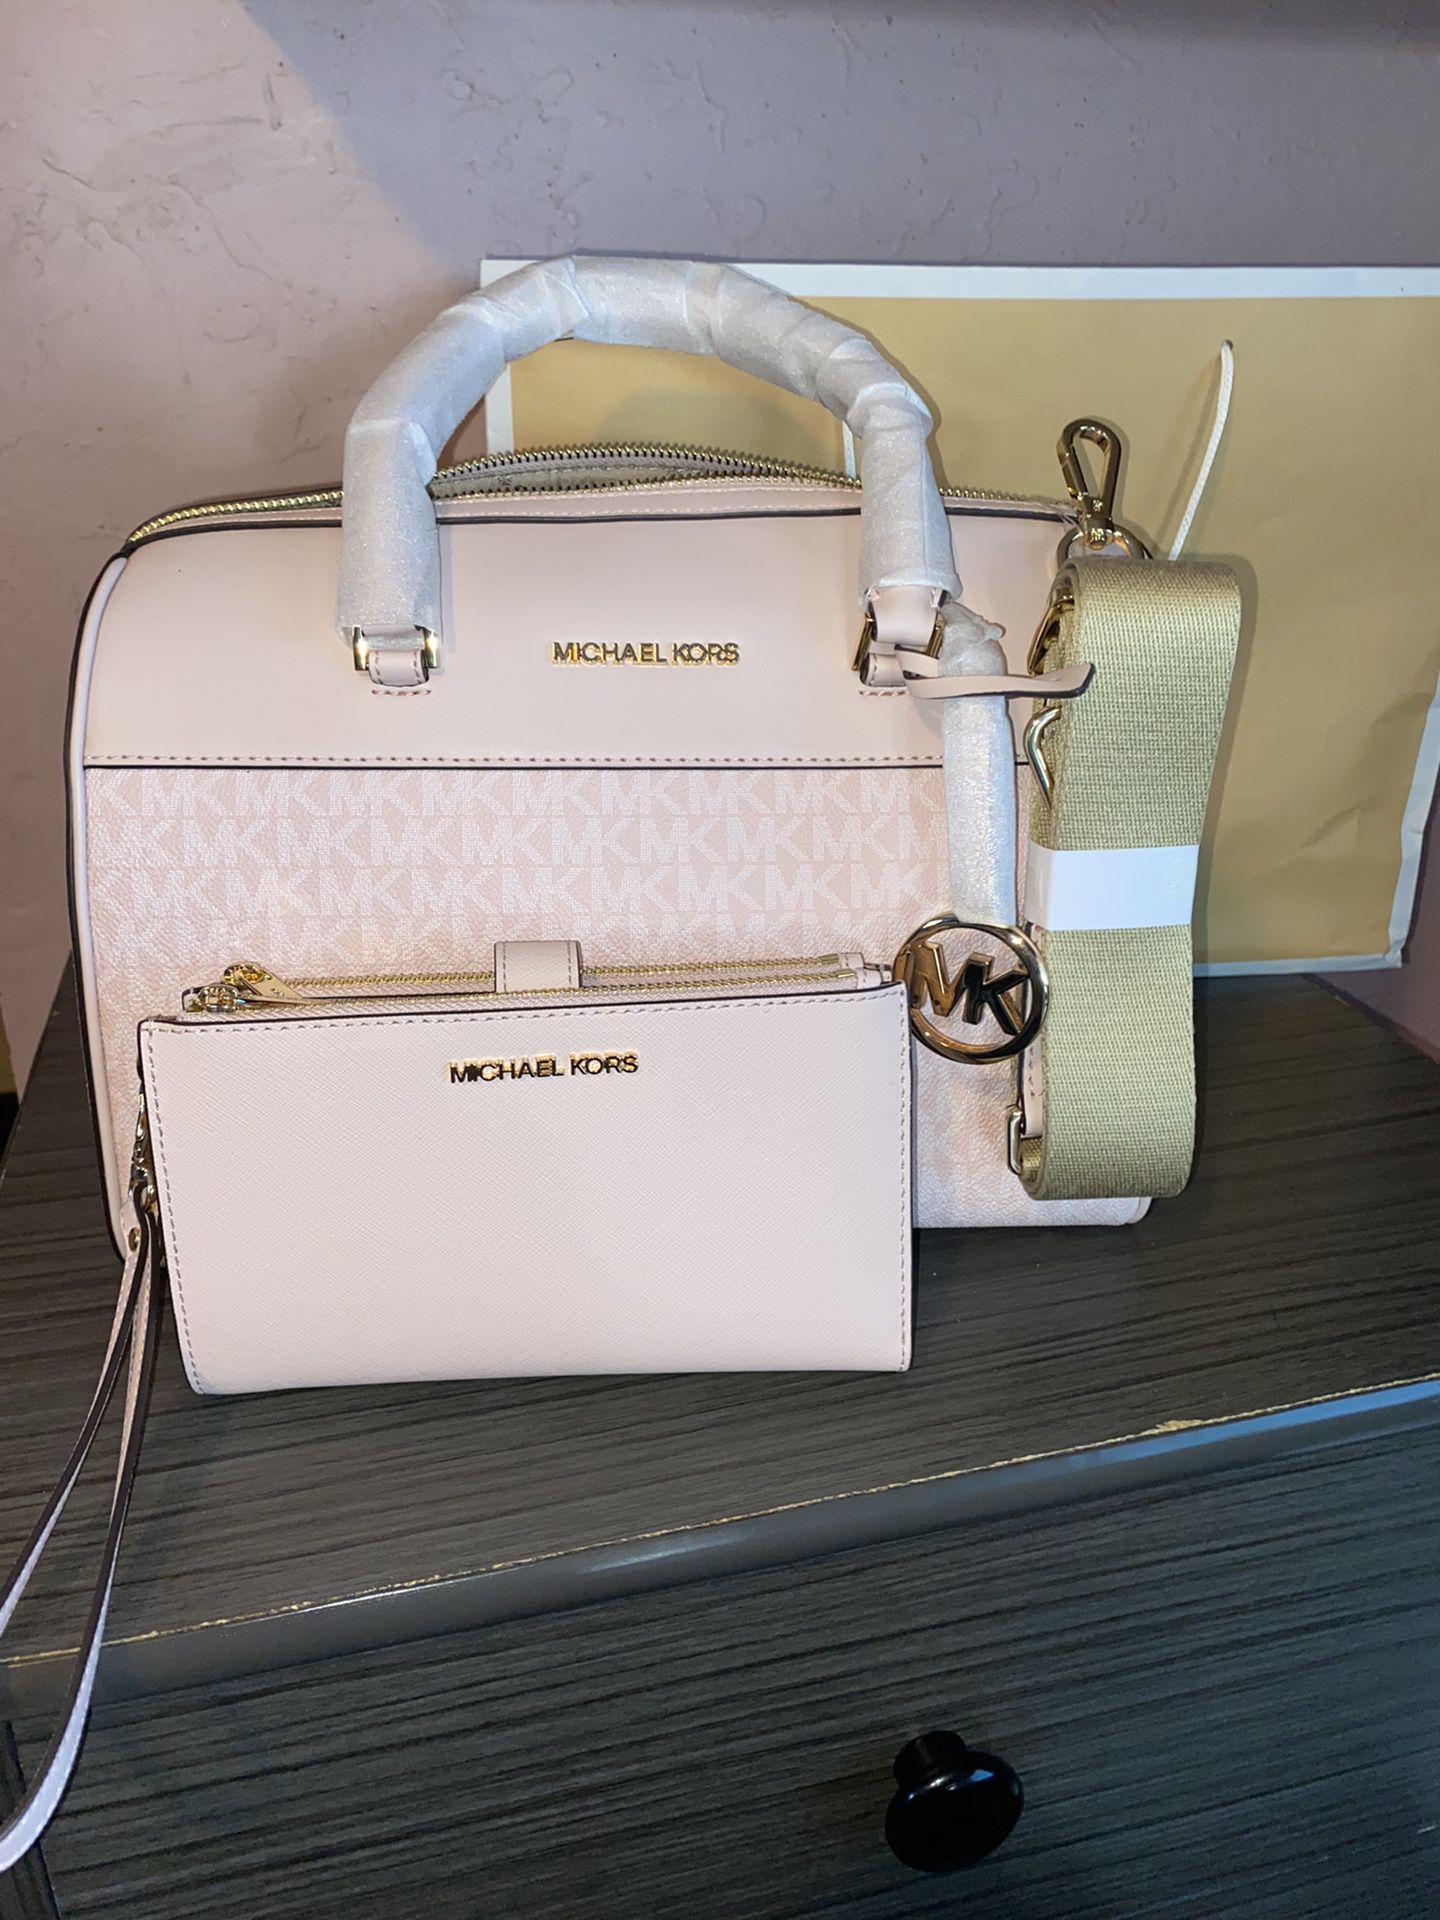 Pink Michael Kors Purse for Sale in Santa Ana, CA - OfferUp